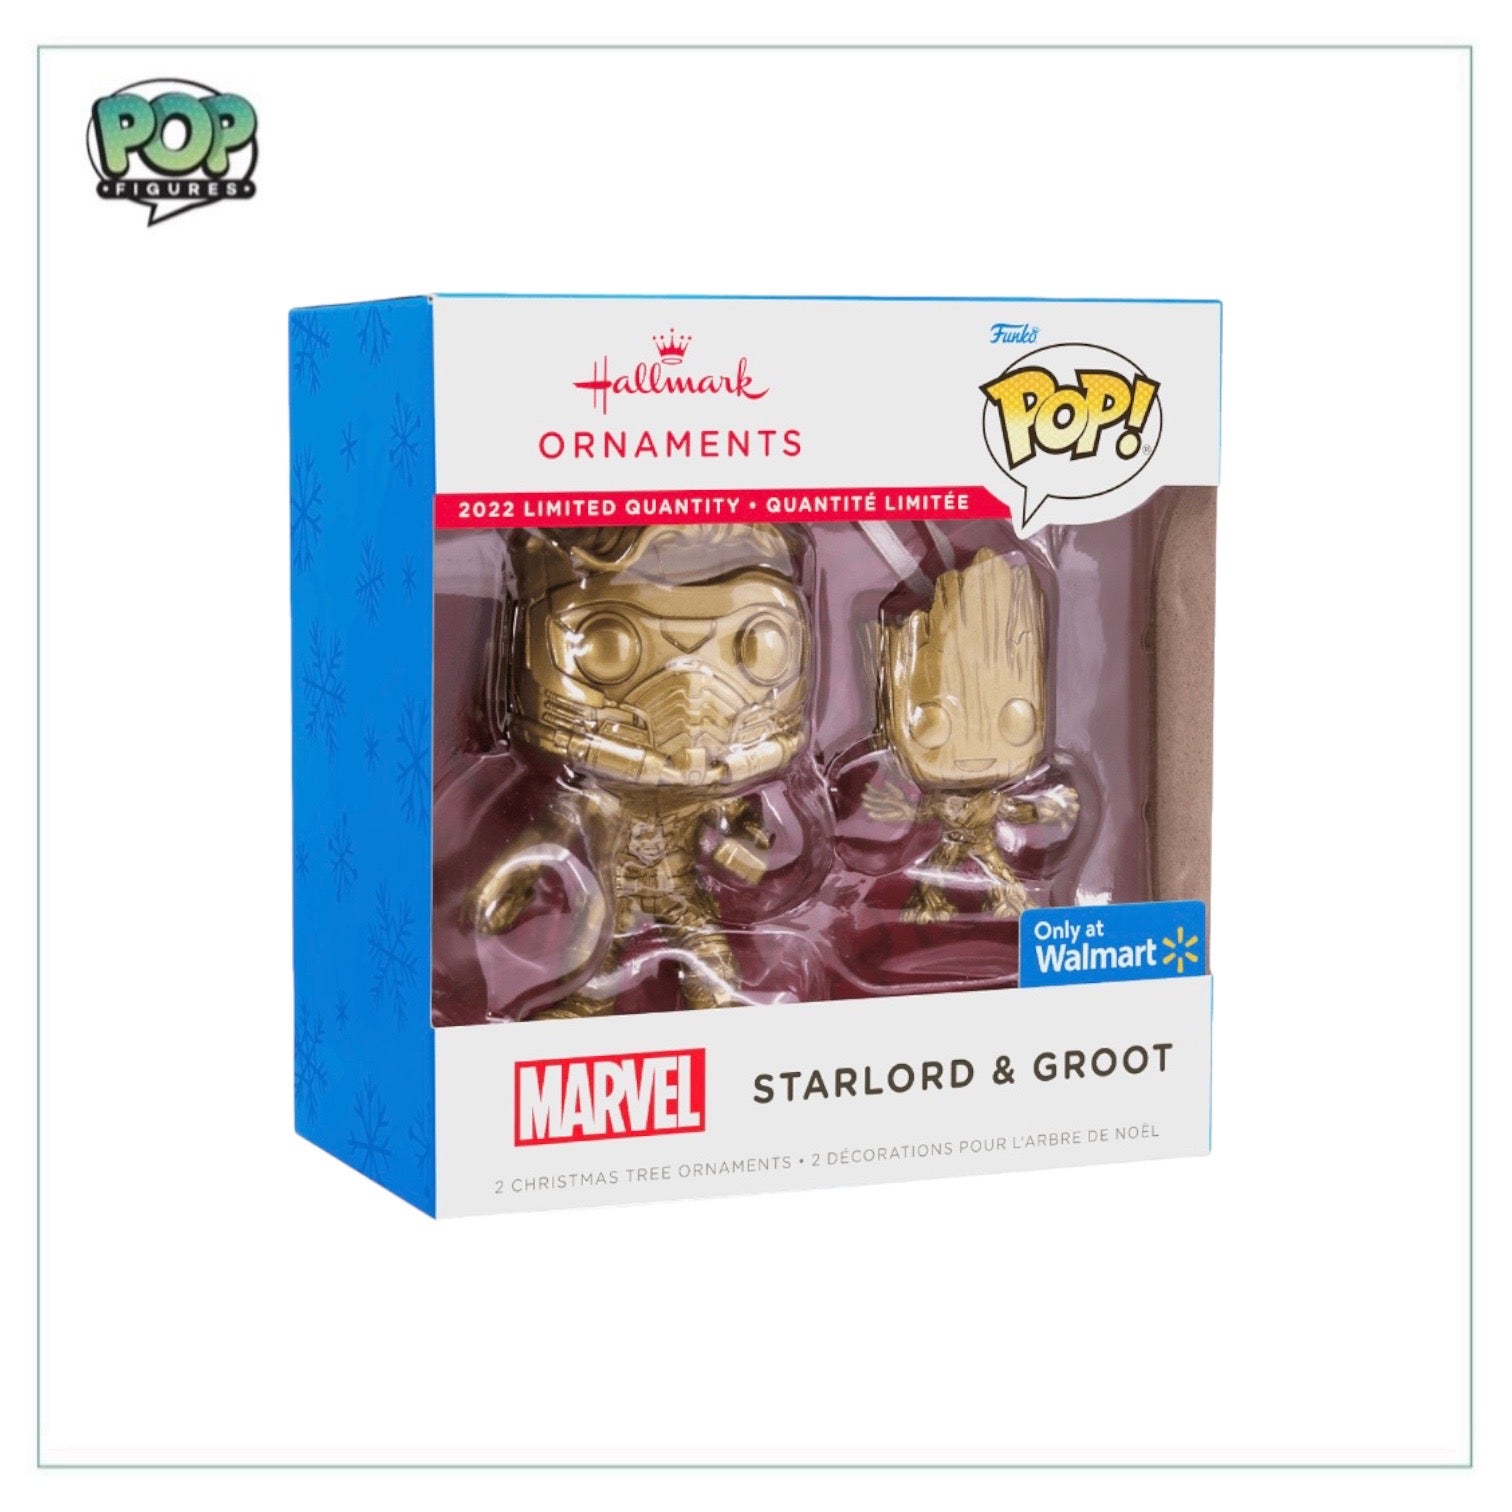 Starlord & Groot (Gold Chase) Funko x Hallmark Christmas Ornaments - Marvel - Walmart Exclusive